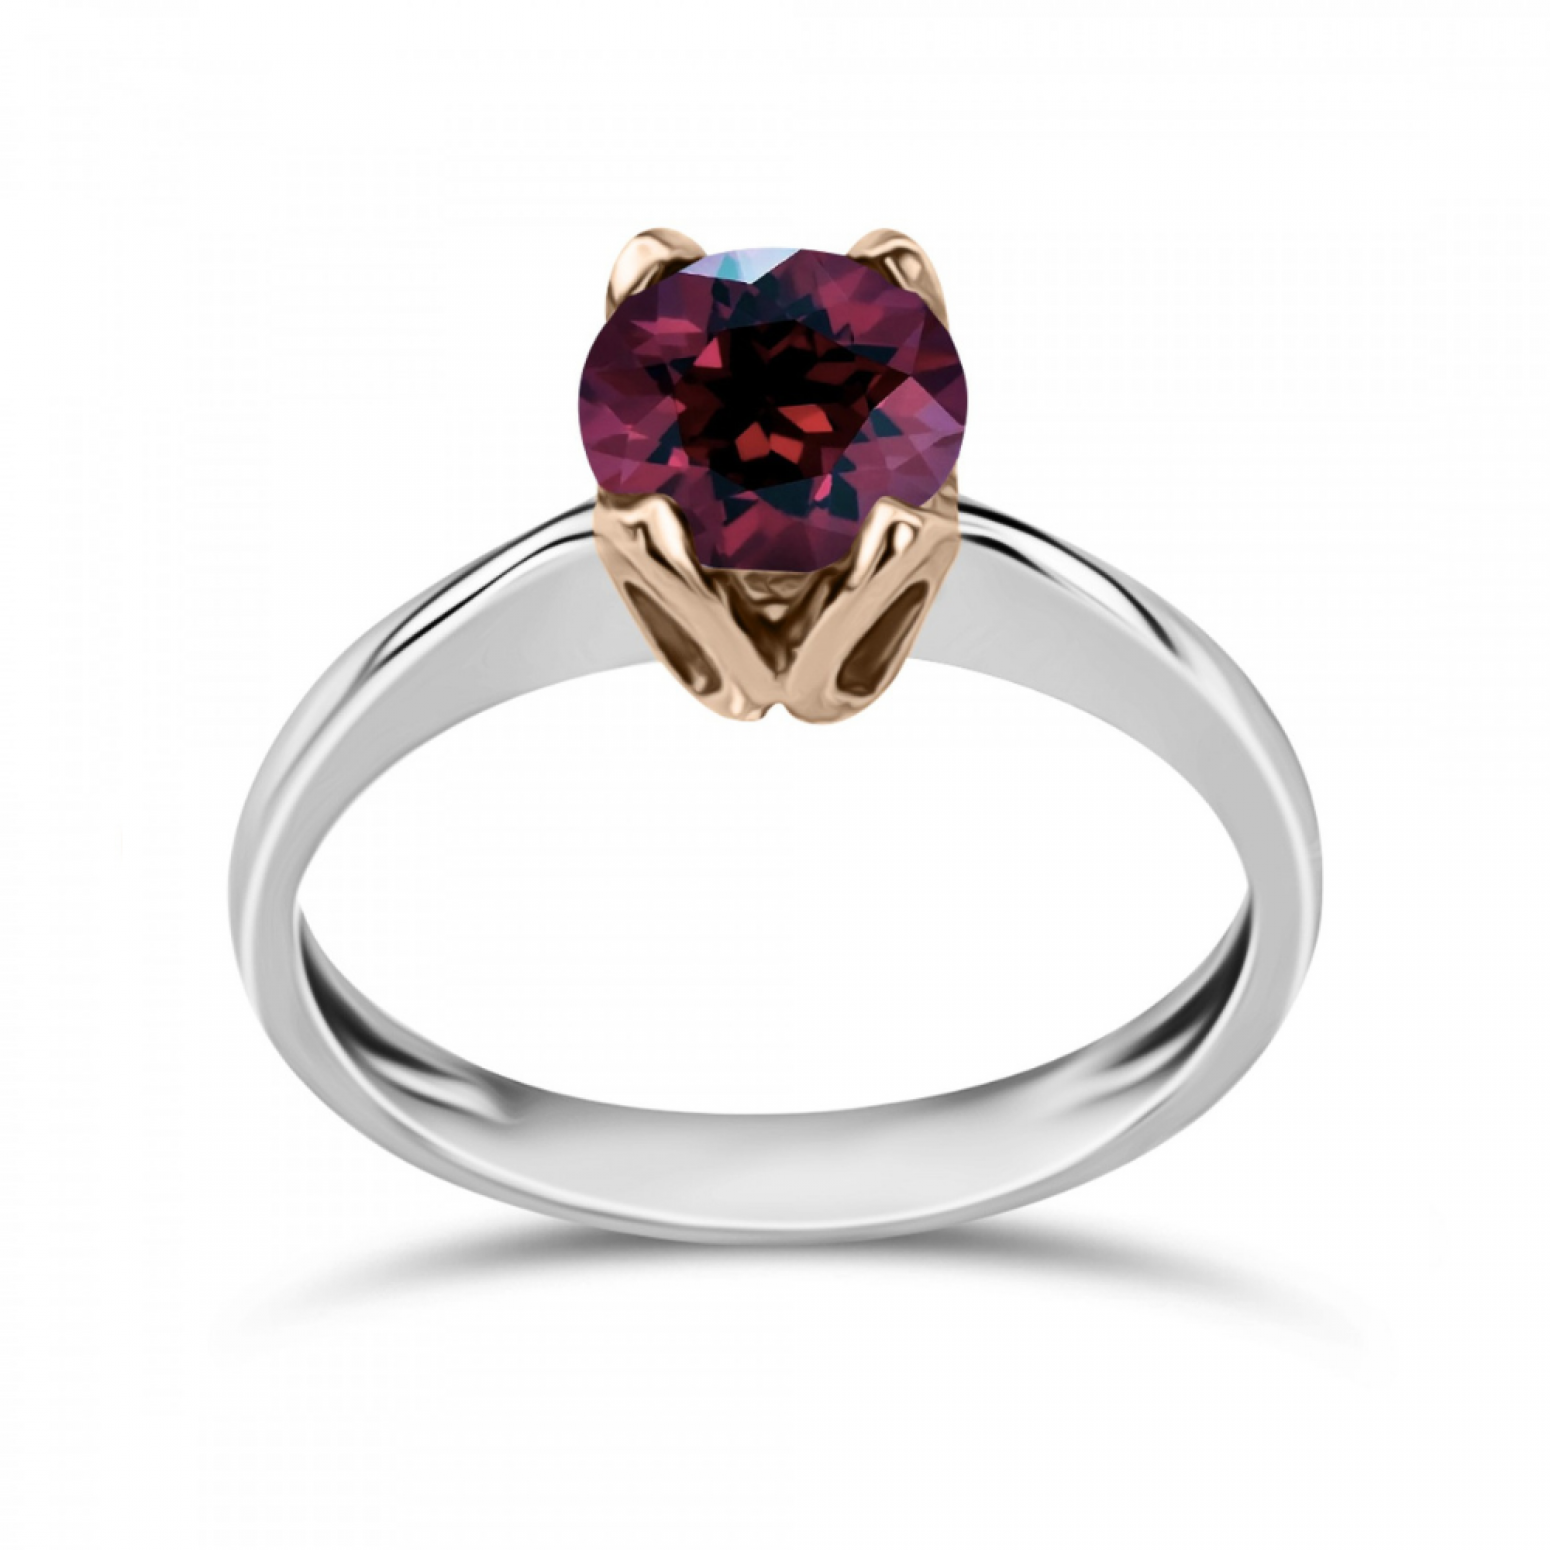 Solitaire ring 14K whte and pink gold with red zircon, da3422 ENGAGEMENT RINGS Κοσμηματα - chrilia.gr